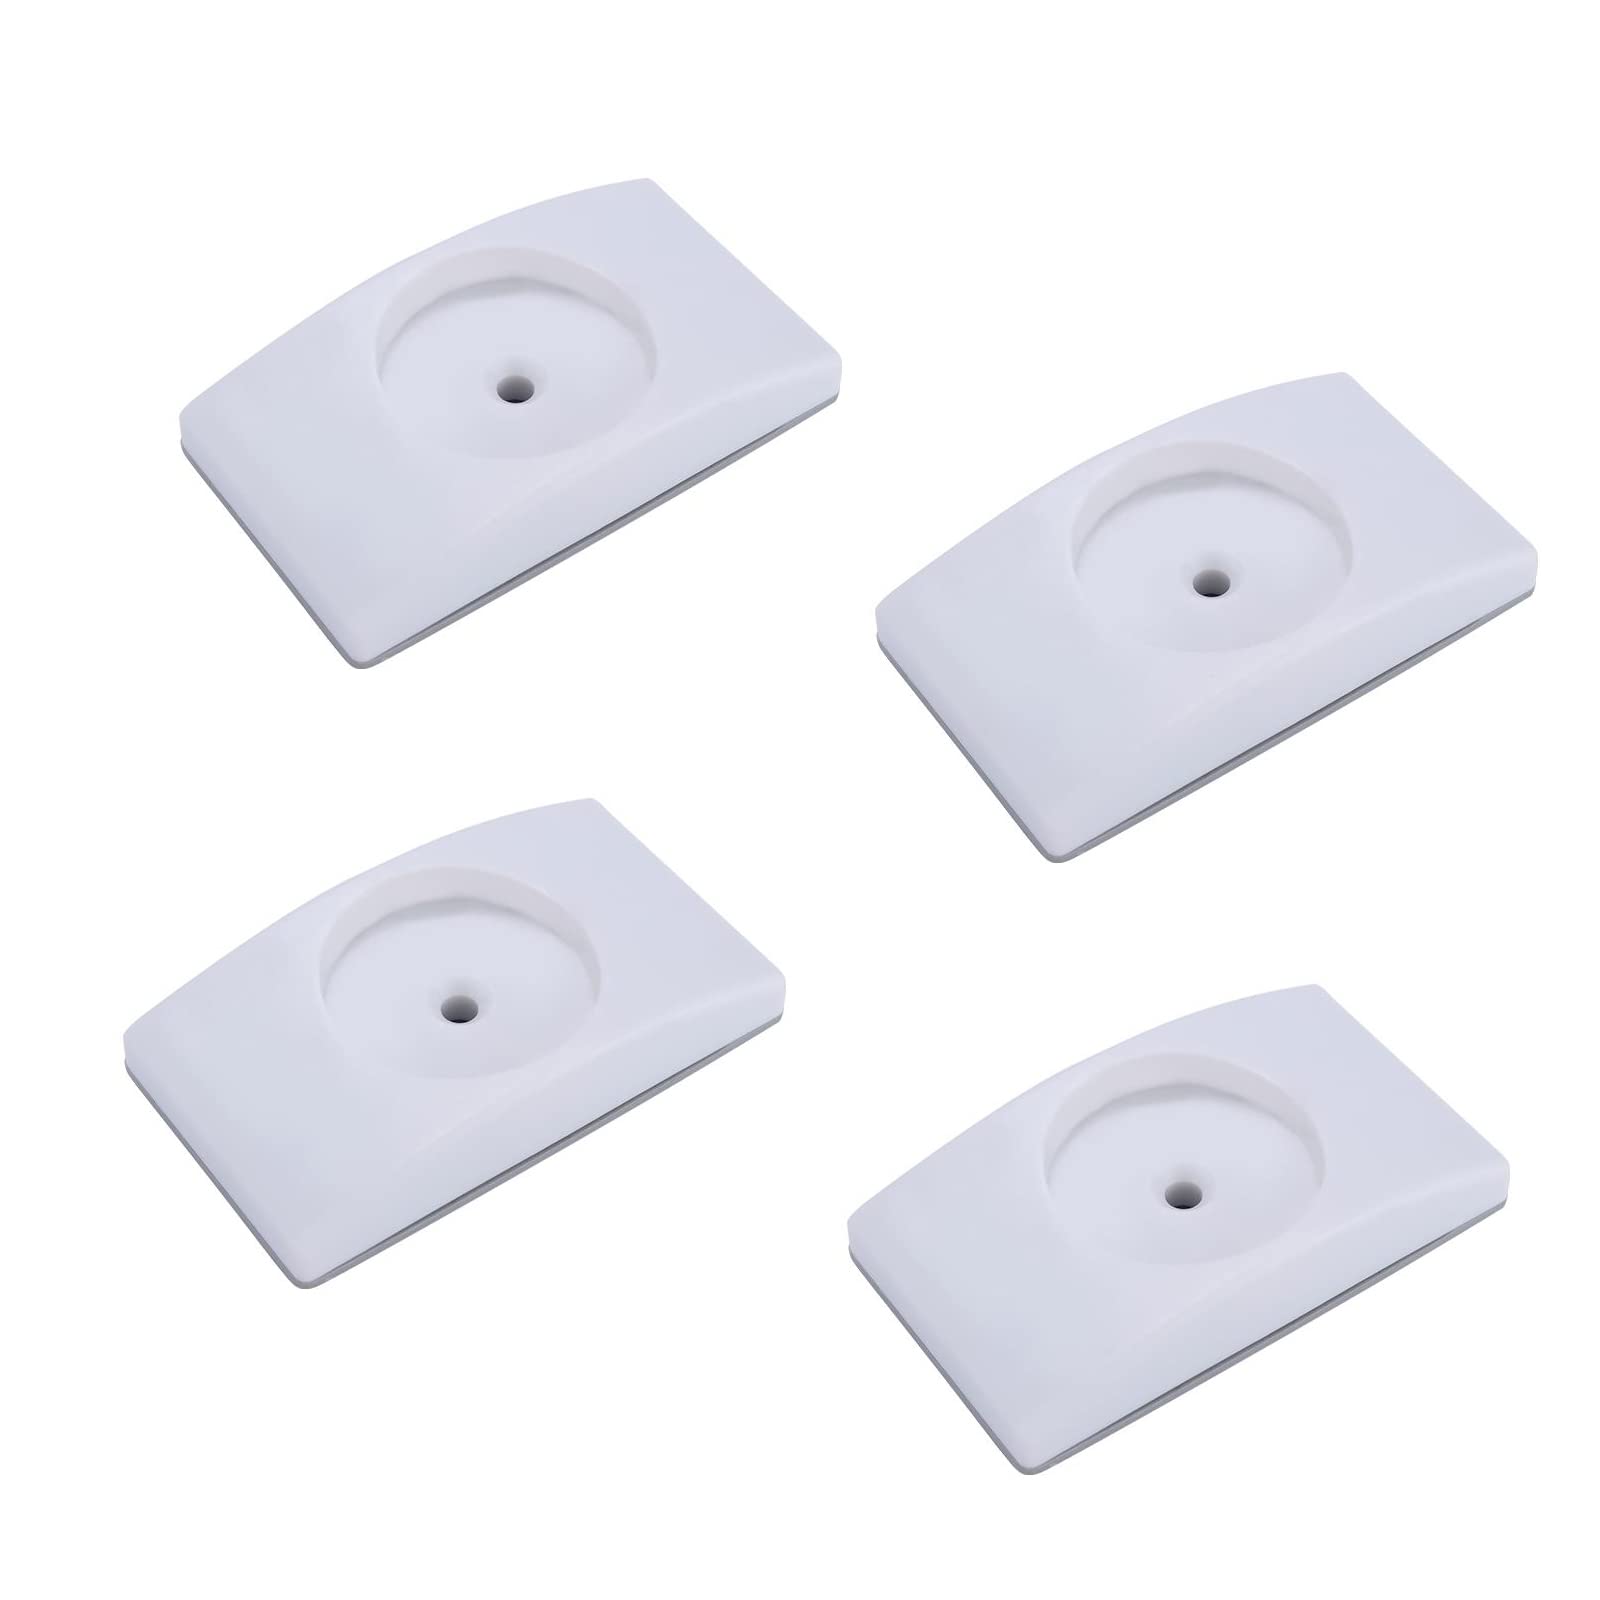 Wall Guard Protector, 4Pcs Safety Gate Wall Protector ,Gate Wall Protector,Wall Guard Pads,Stair Gate Extension Baby Gate Wall Protector, for Protect Door Stair Wall Surface (White)